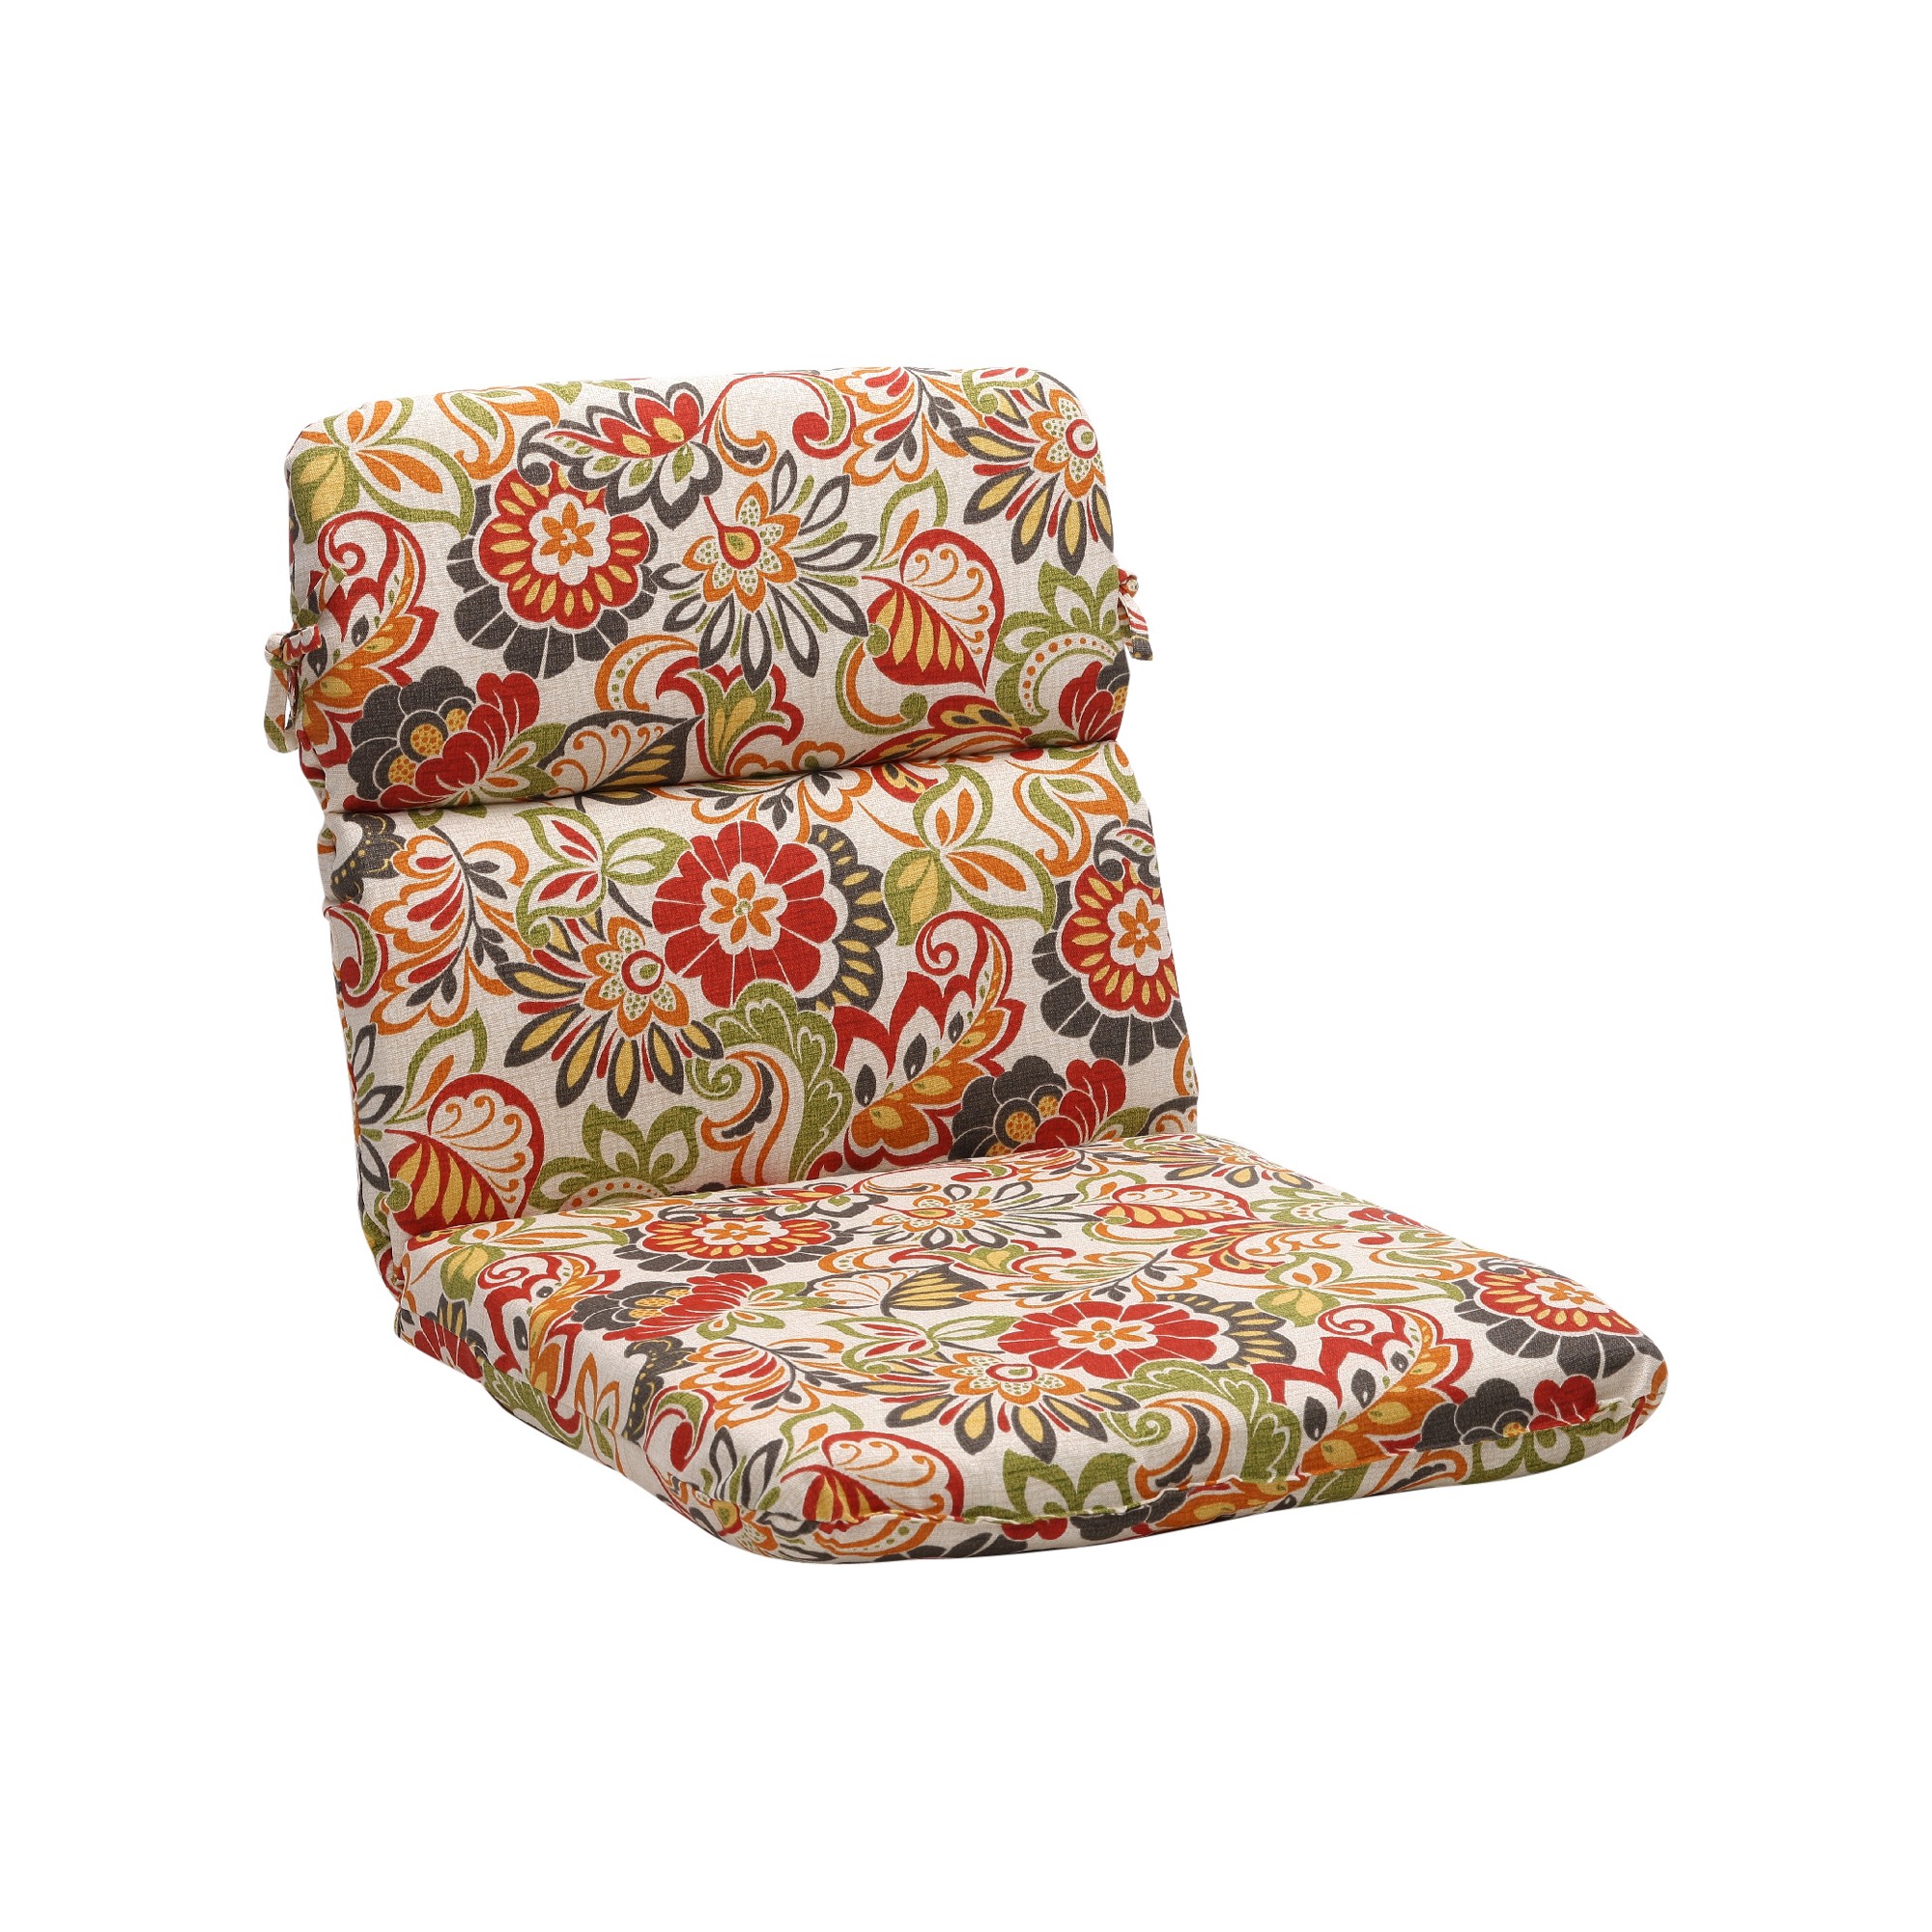 Outdoor Chair Cushion - Green/Off-White/Red Floral